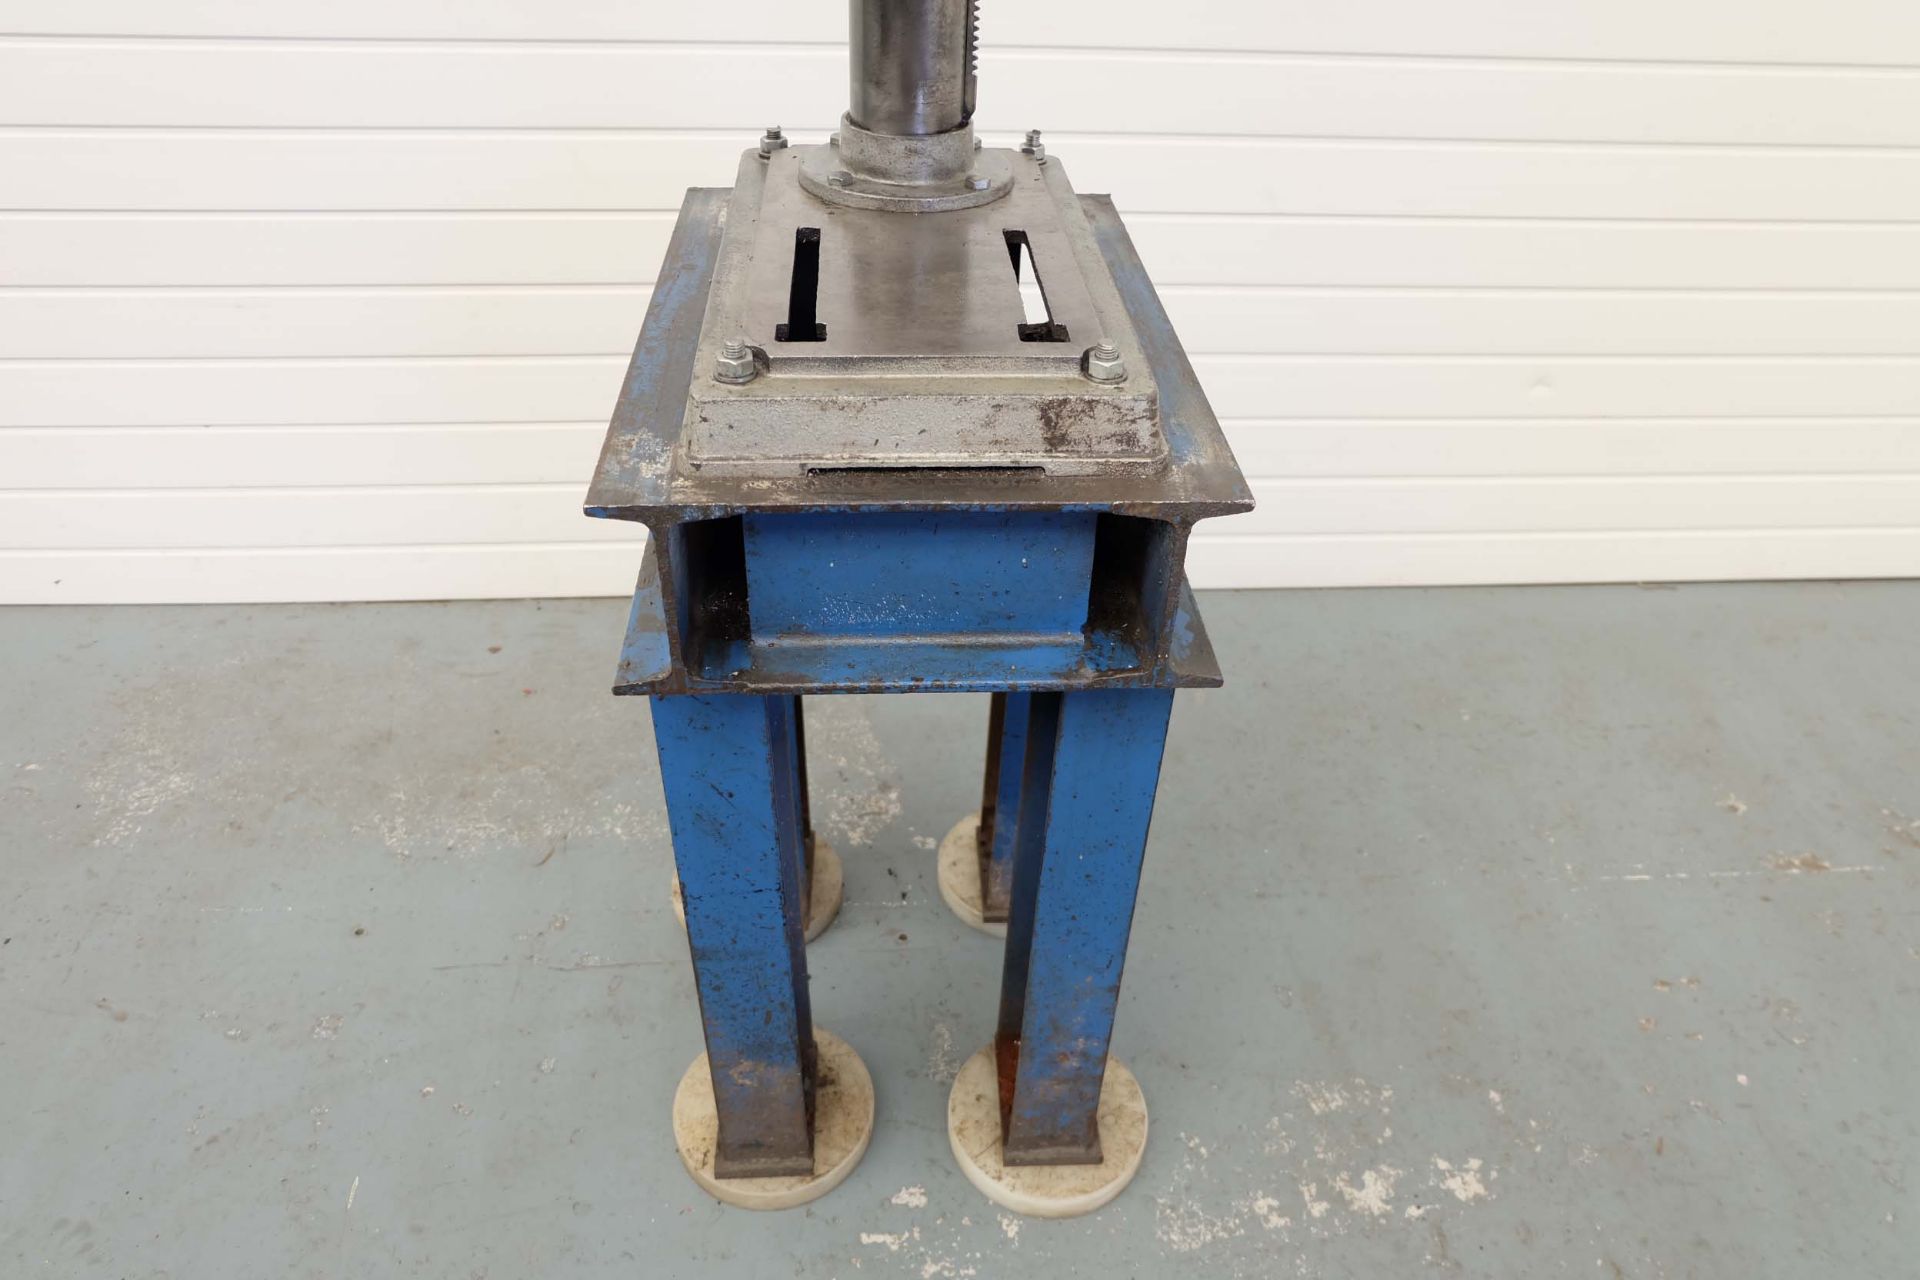 Draper Expert Bench Drill On Steel Stand. Drilling Capacity 19mm. Chuck Capacity 1 -13mm. Spindle Ta - Image 10 of 11